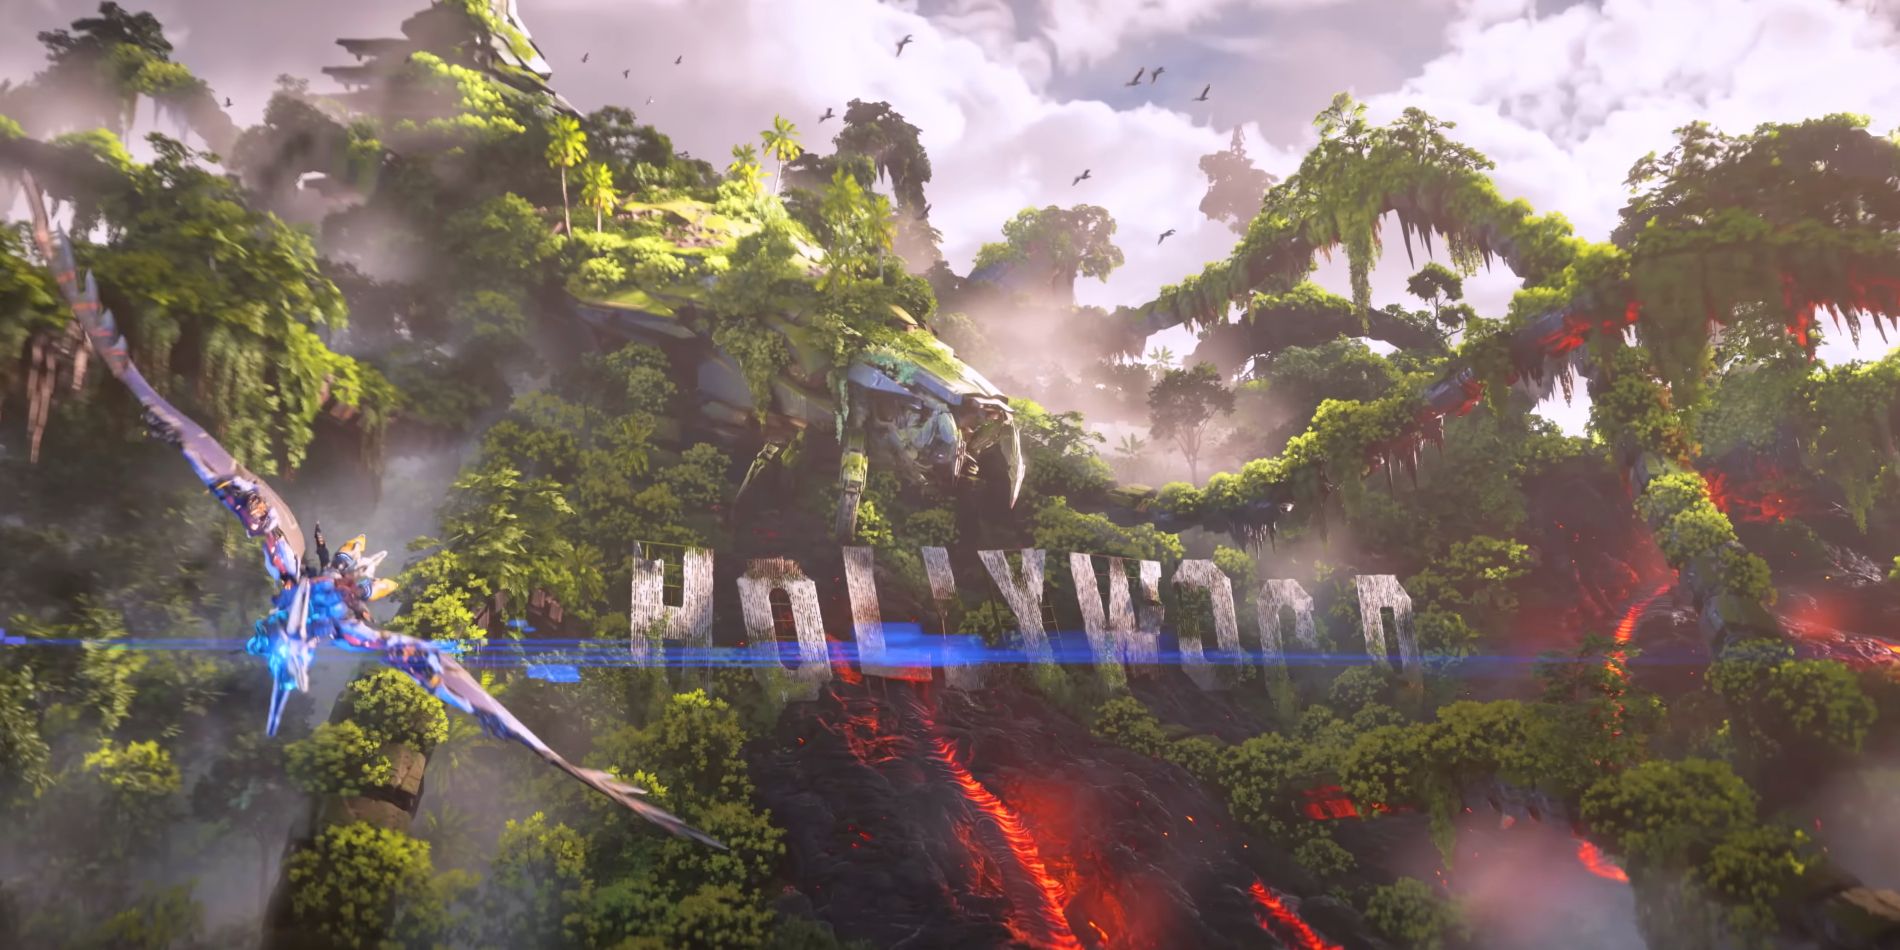 Aloy, the main character of the Horizon series, is seen riding a robotic pterodactyl in front of the Hollywood sign that's overgrown with plants and has a giant robot crawling on top of it and lava spilling out from its side.